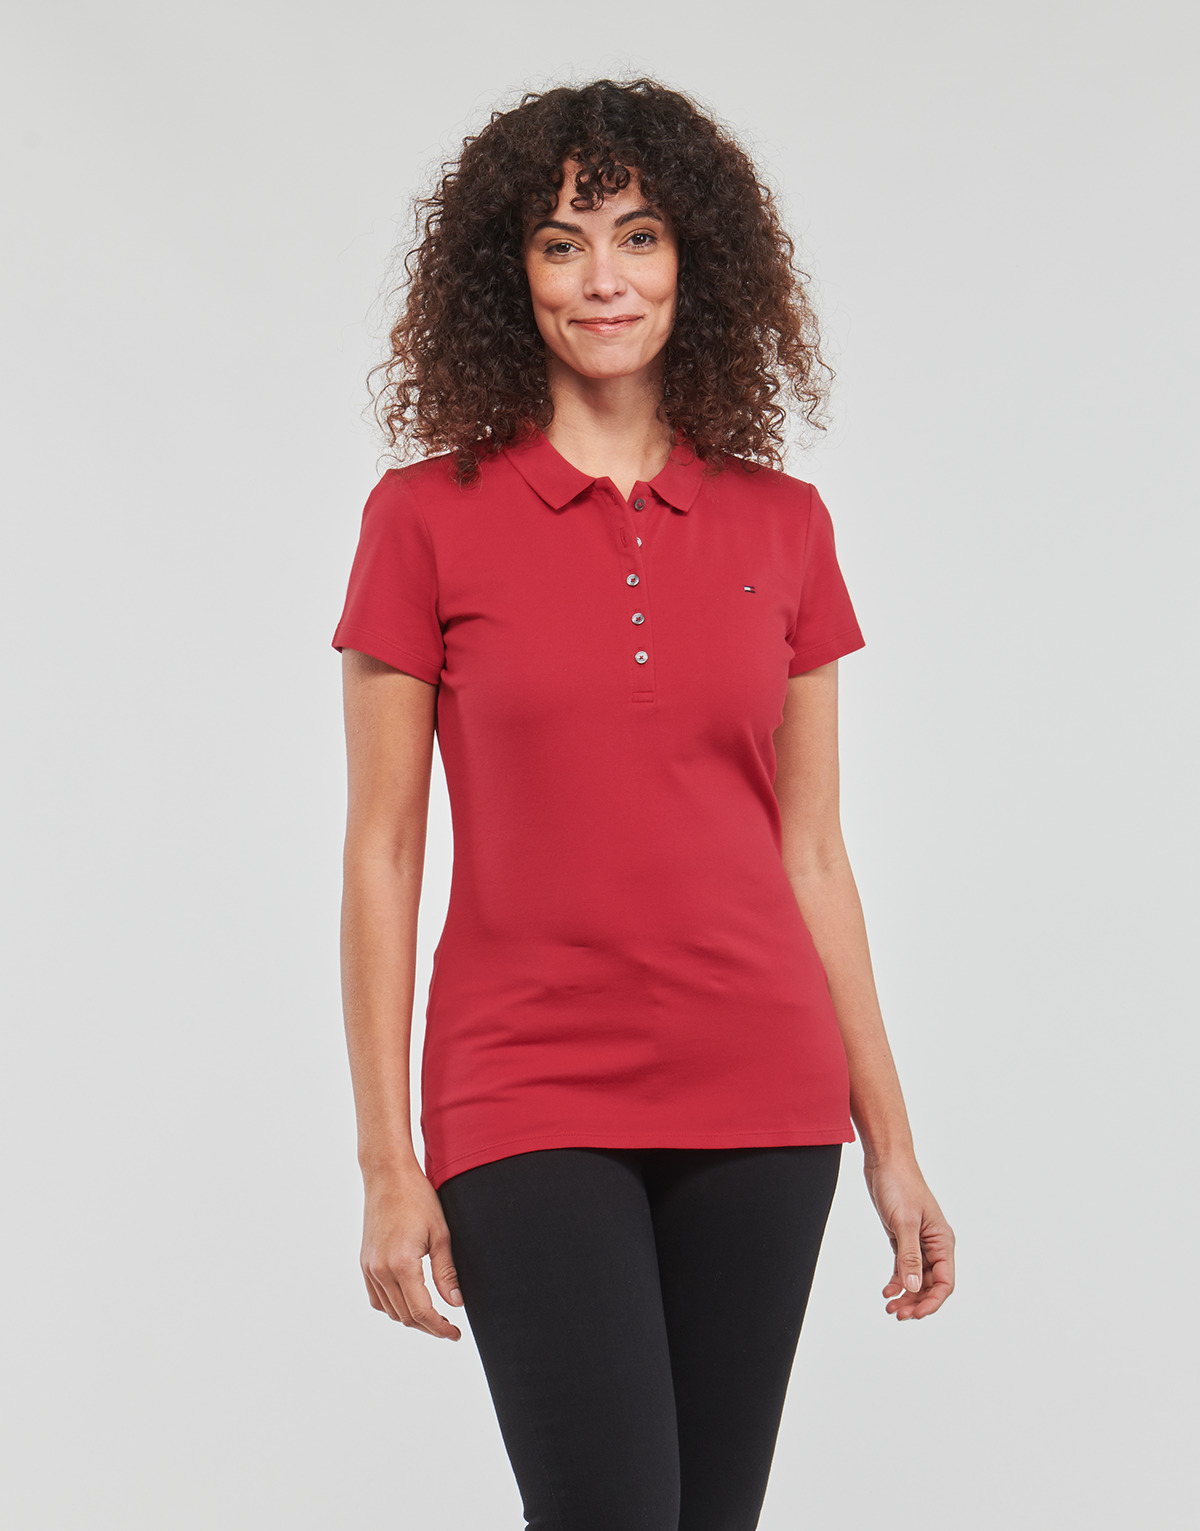 Tommy Hilfiger Rouge NEW CHIARA lTzZSe12